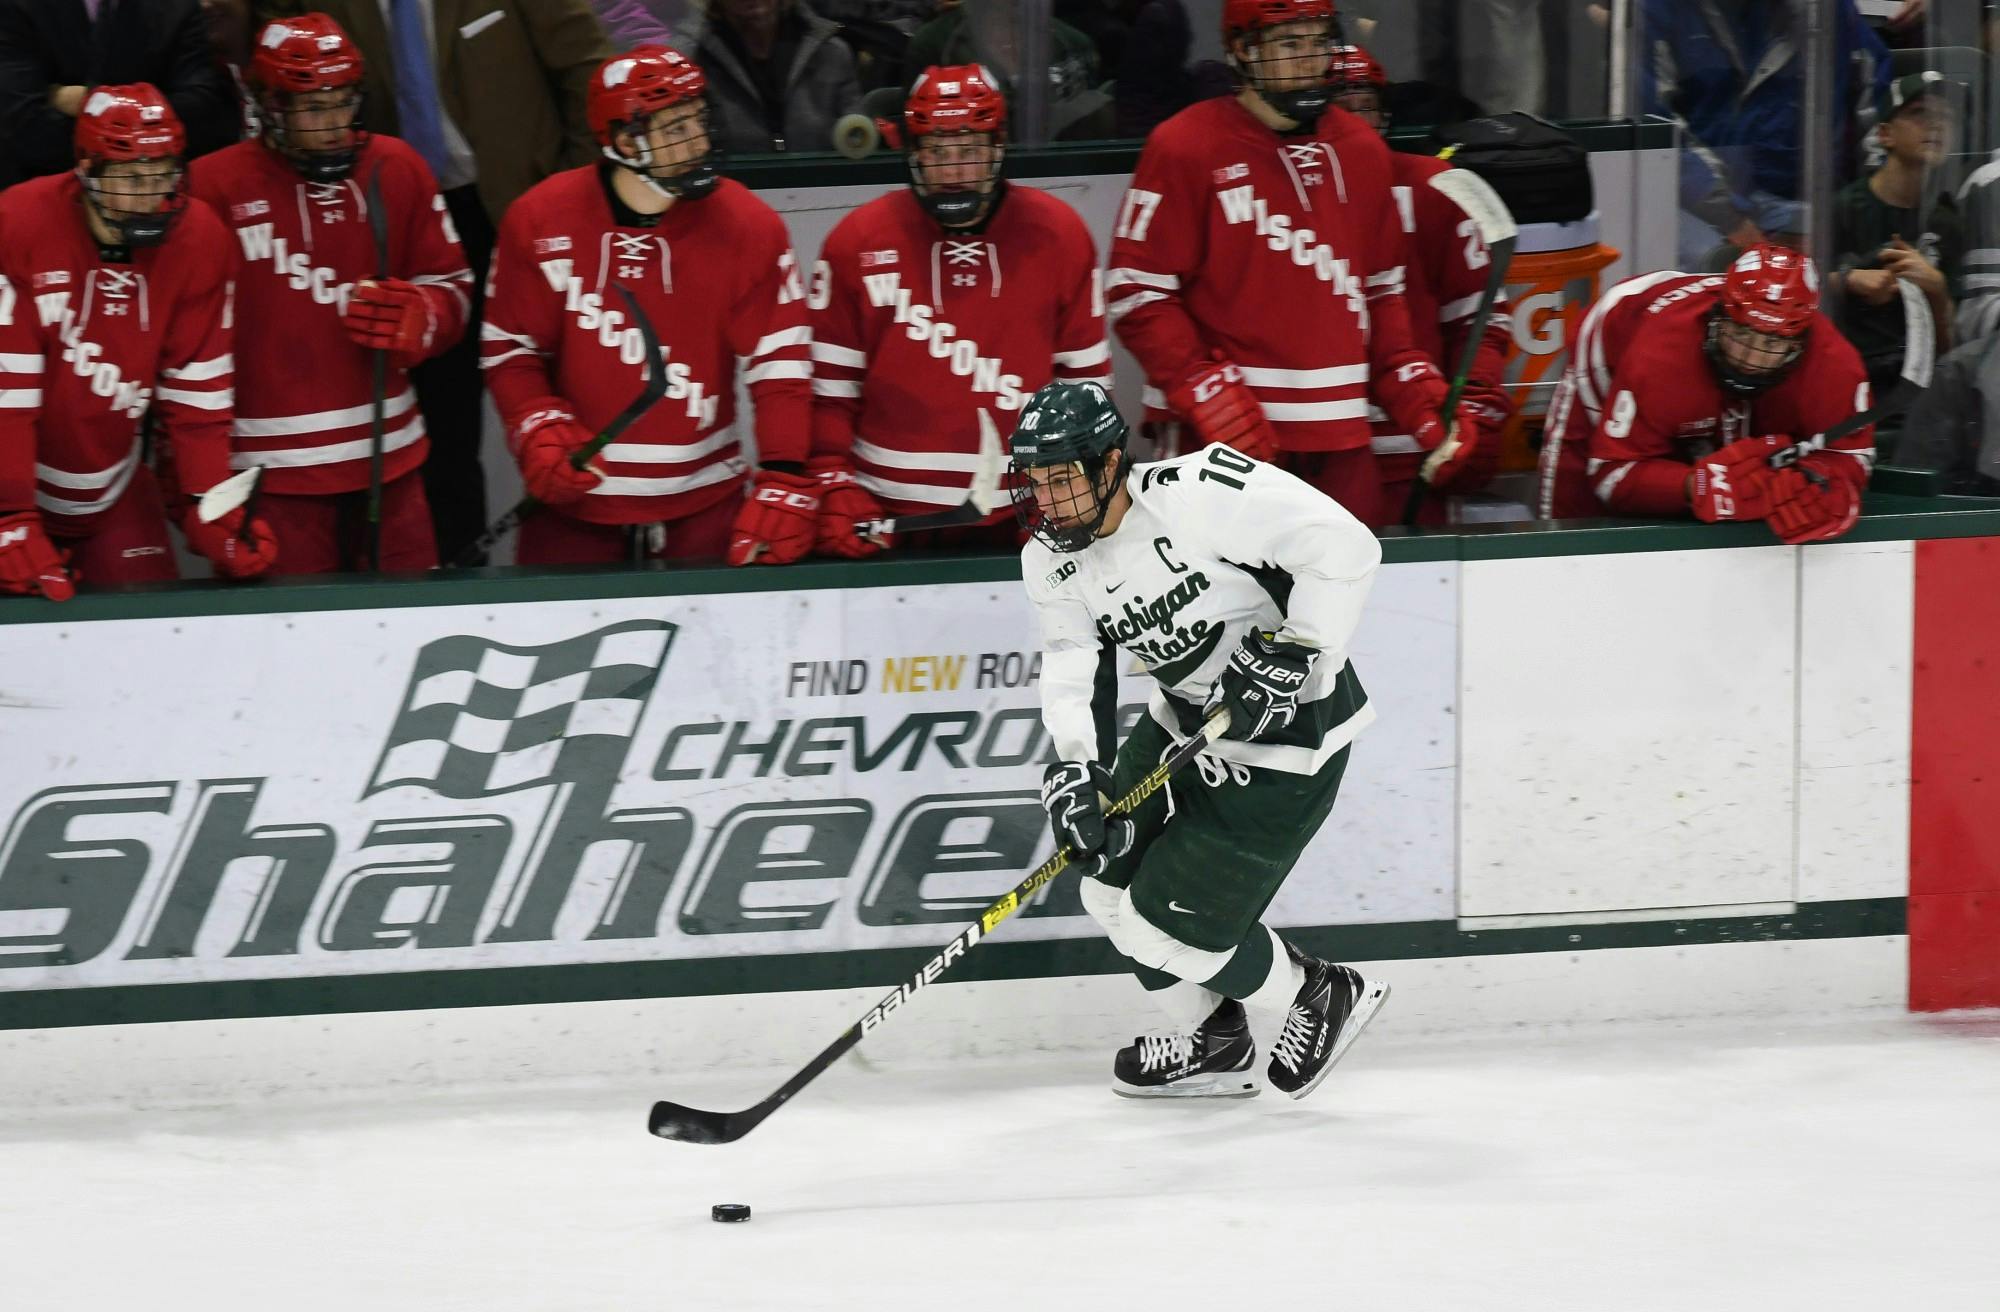 Senior Forward Sam Saliba (10) during the game against Wisconsin at the Munn Ice Arena on December 6, 2019. The Spartans defeated the Badgers 3-0.